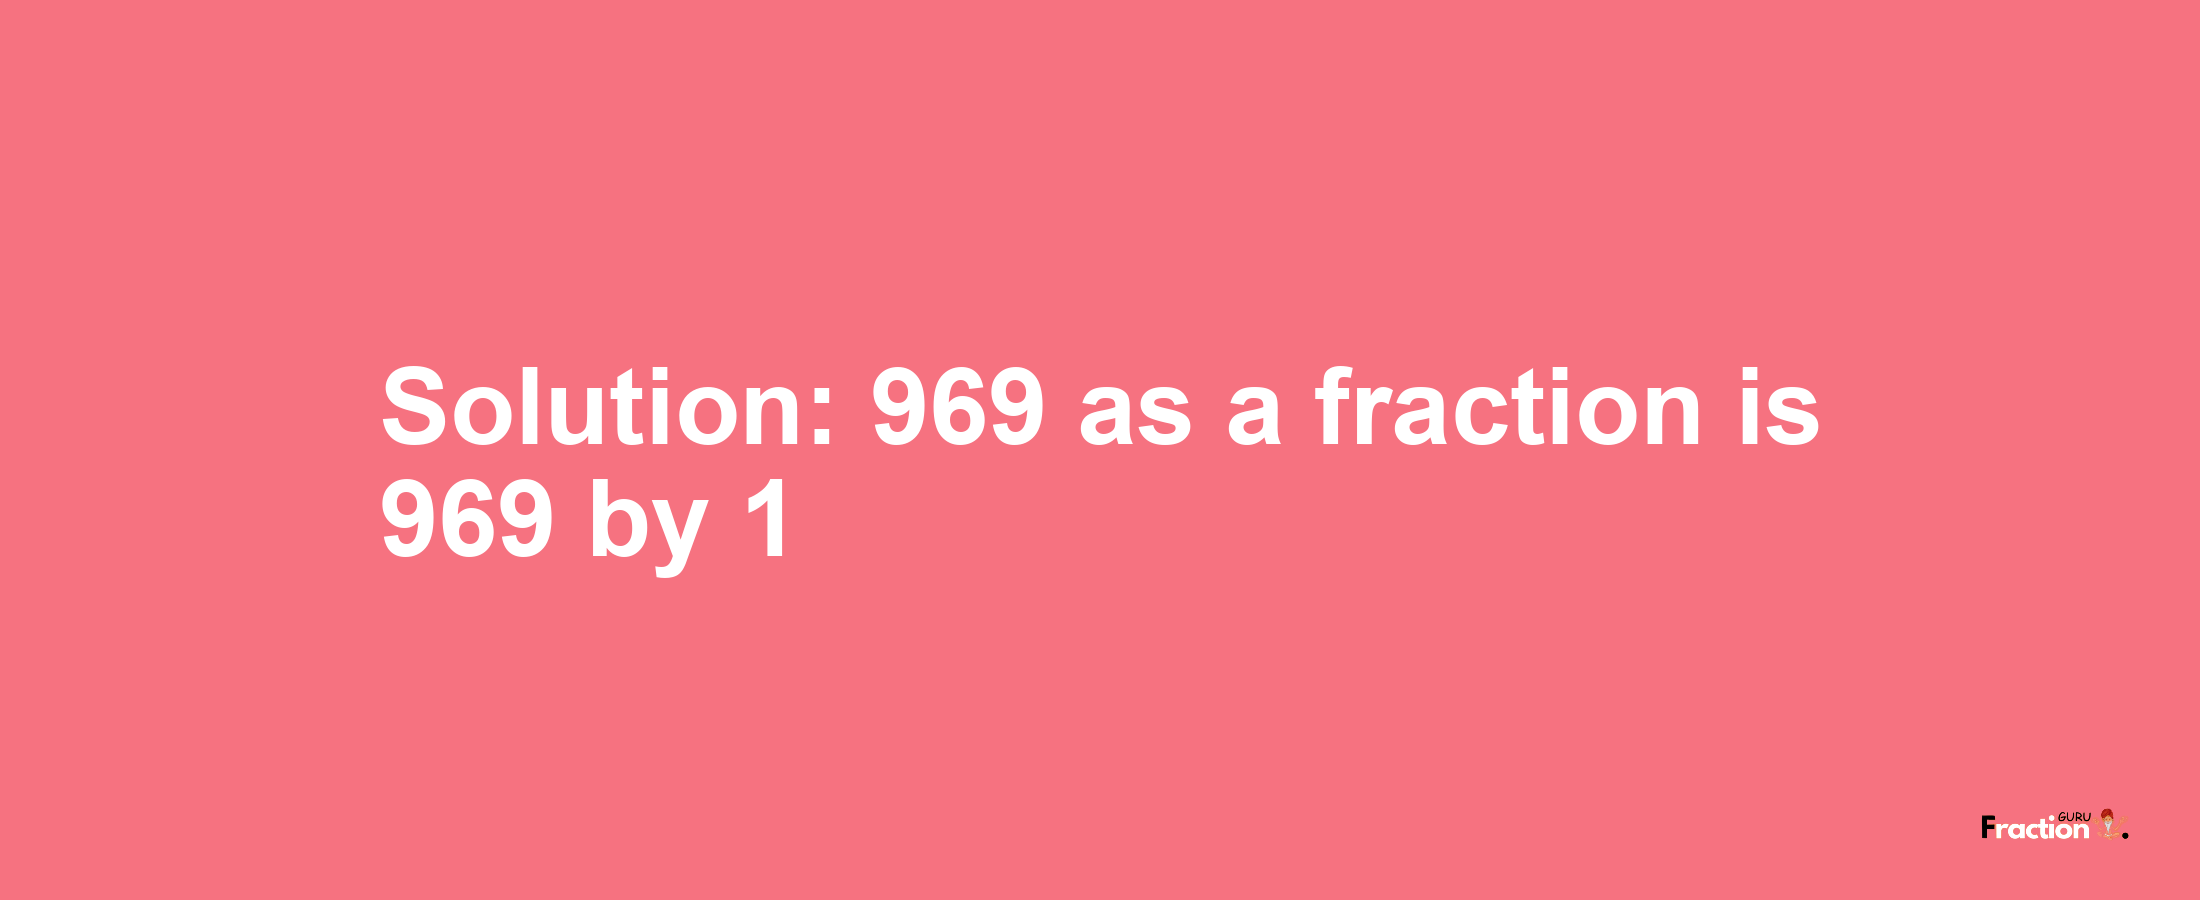 Solution:969 as a fraction is 969/1